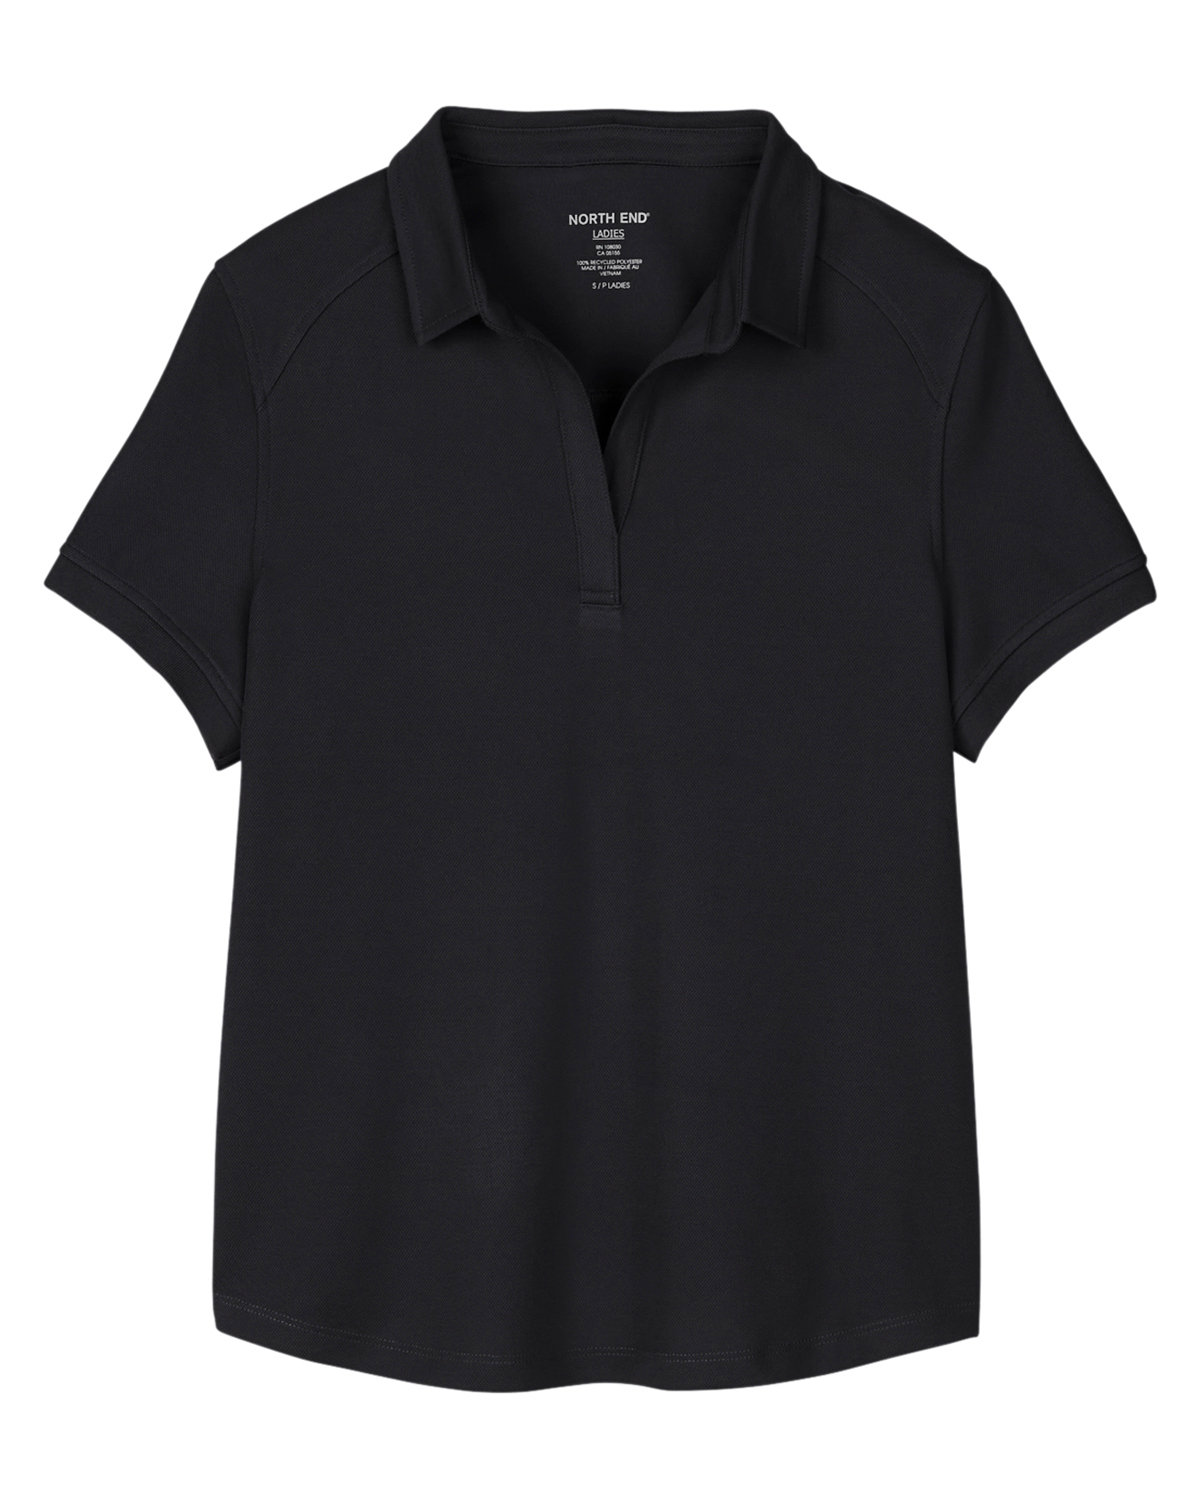 Picture of North End Women's Express Tech Performance Polo